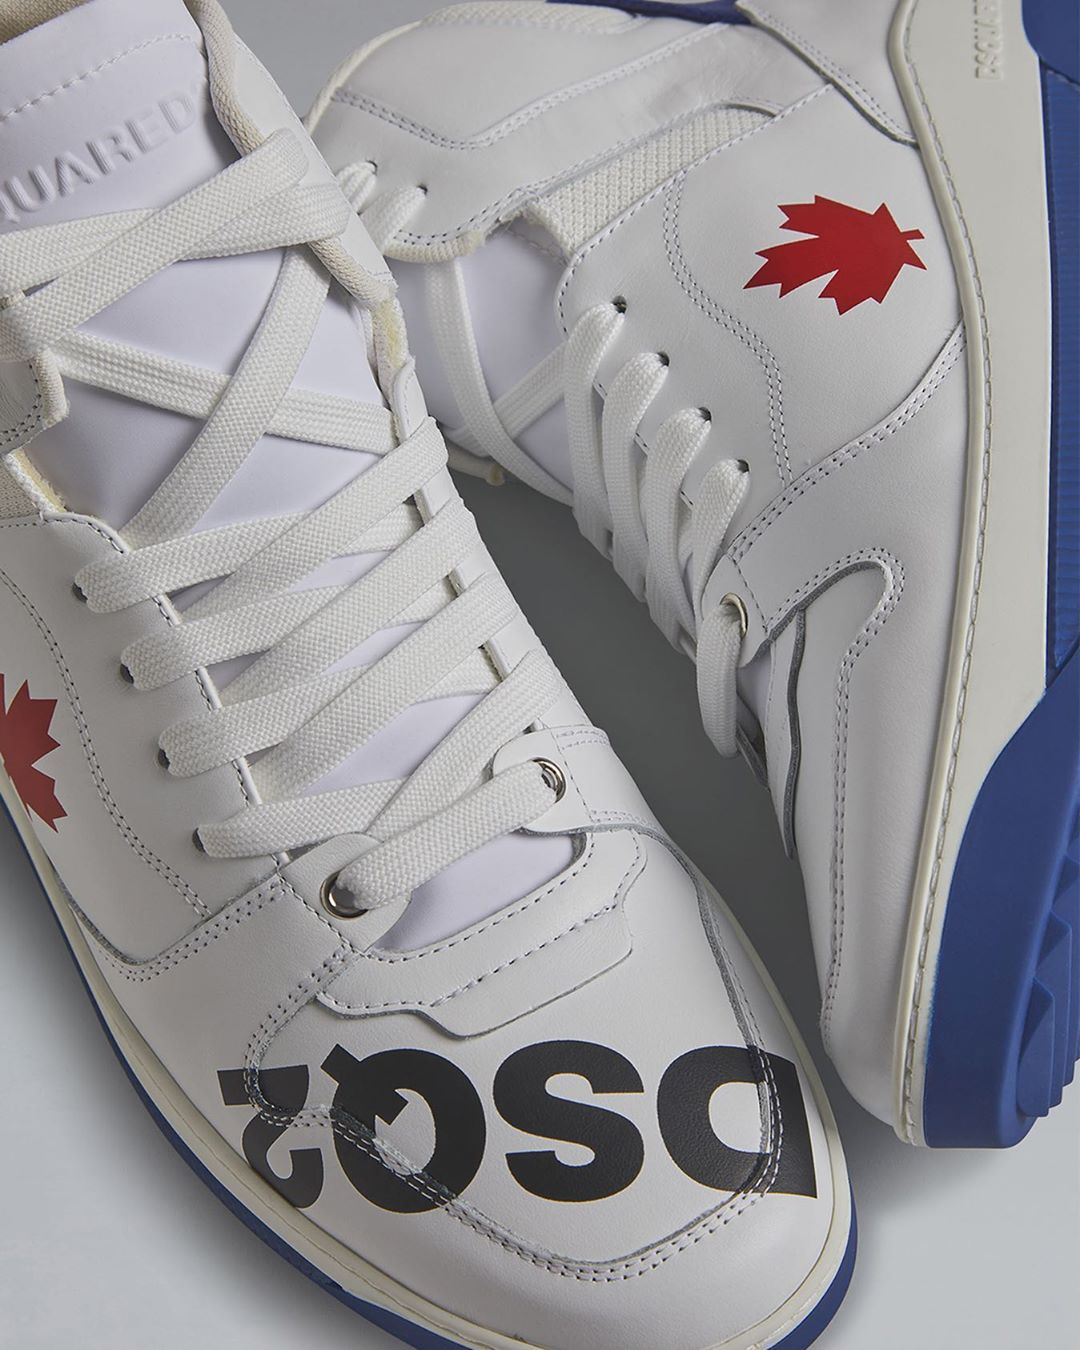 DSQUARED2  - Dean & Dan Caten - Stepping it up for #CanadaDay! 🇨🇦 Give your footwork the ultimate Canada makeover on Dsquared2.com #D2SS20